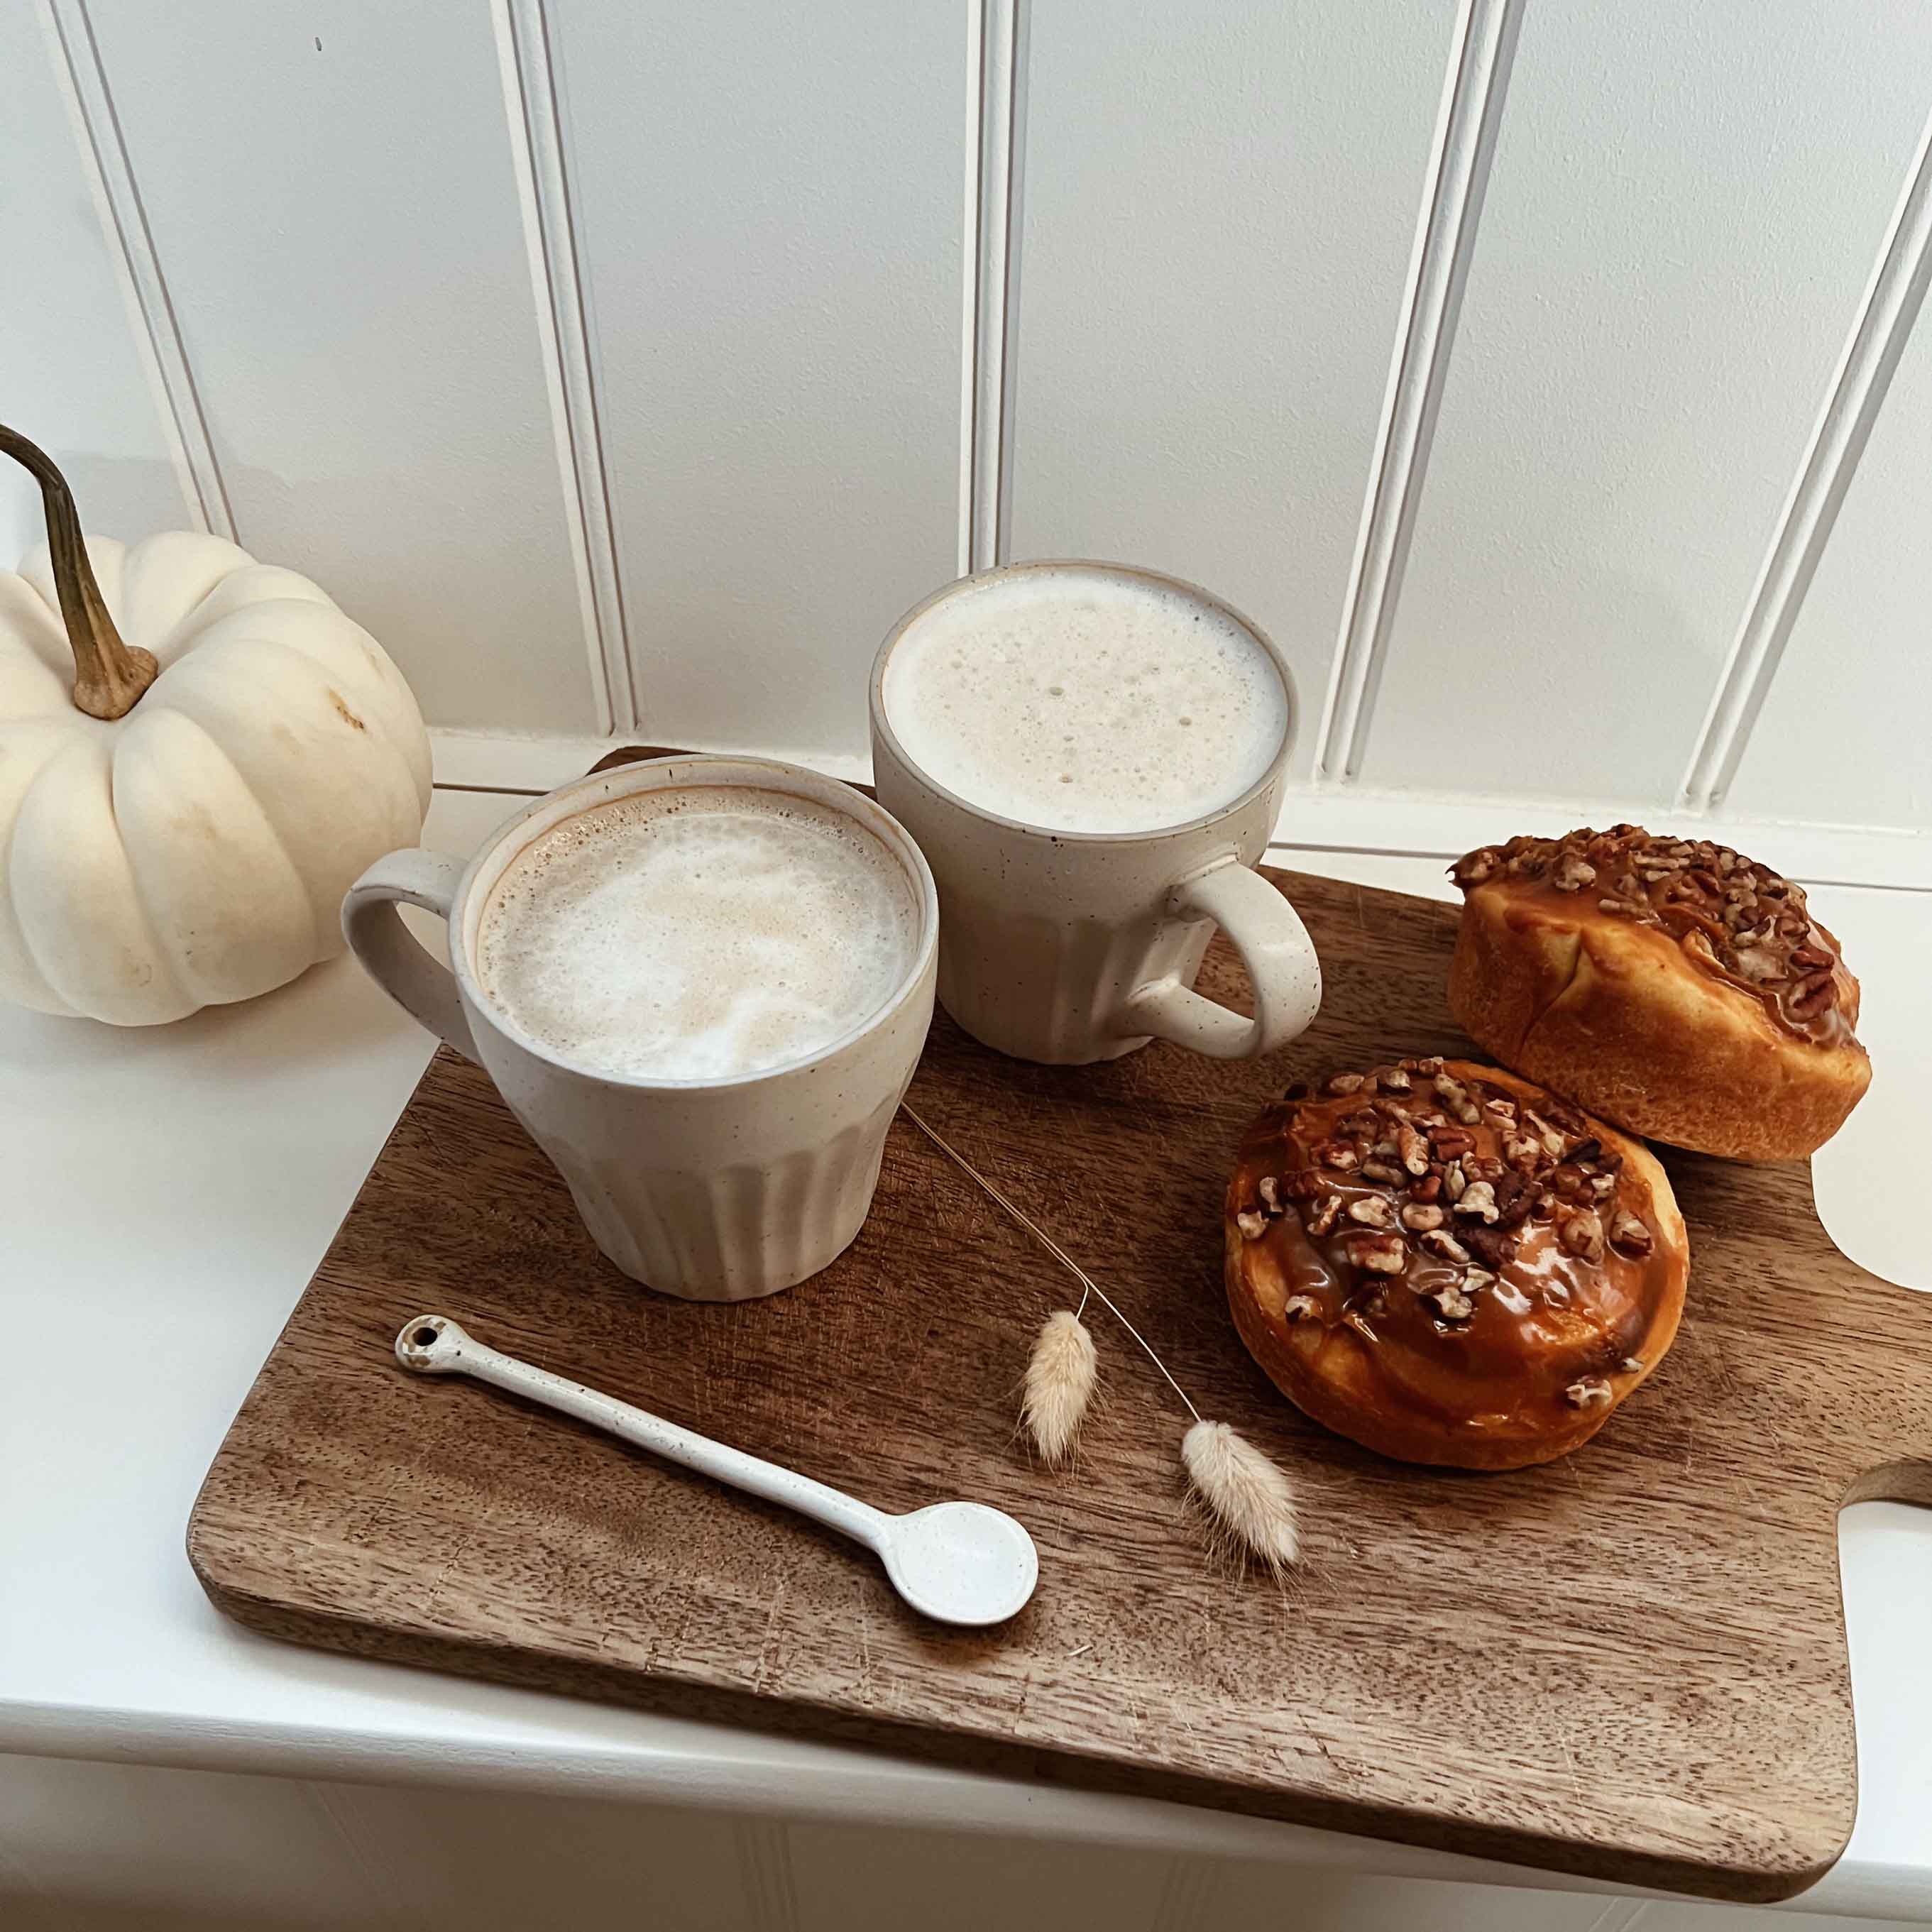 Coffee and pastries at Bramble Cottage